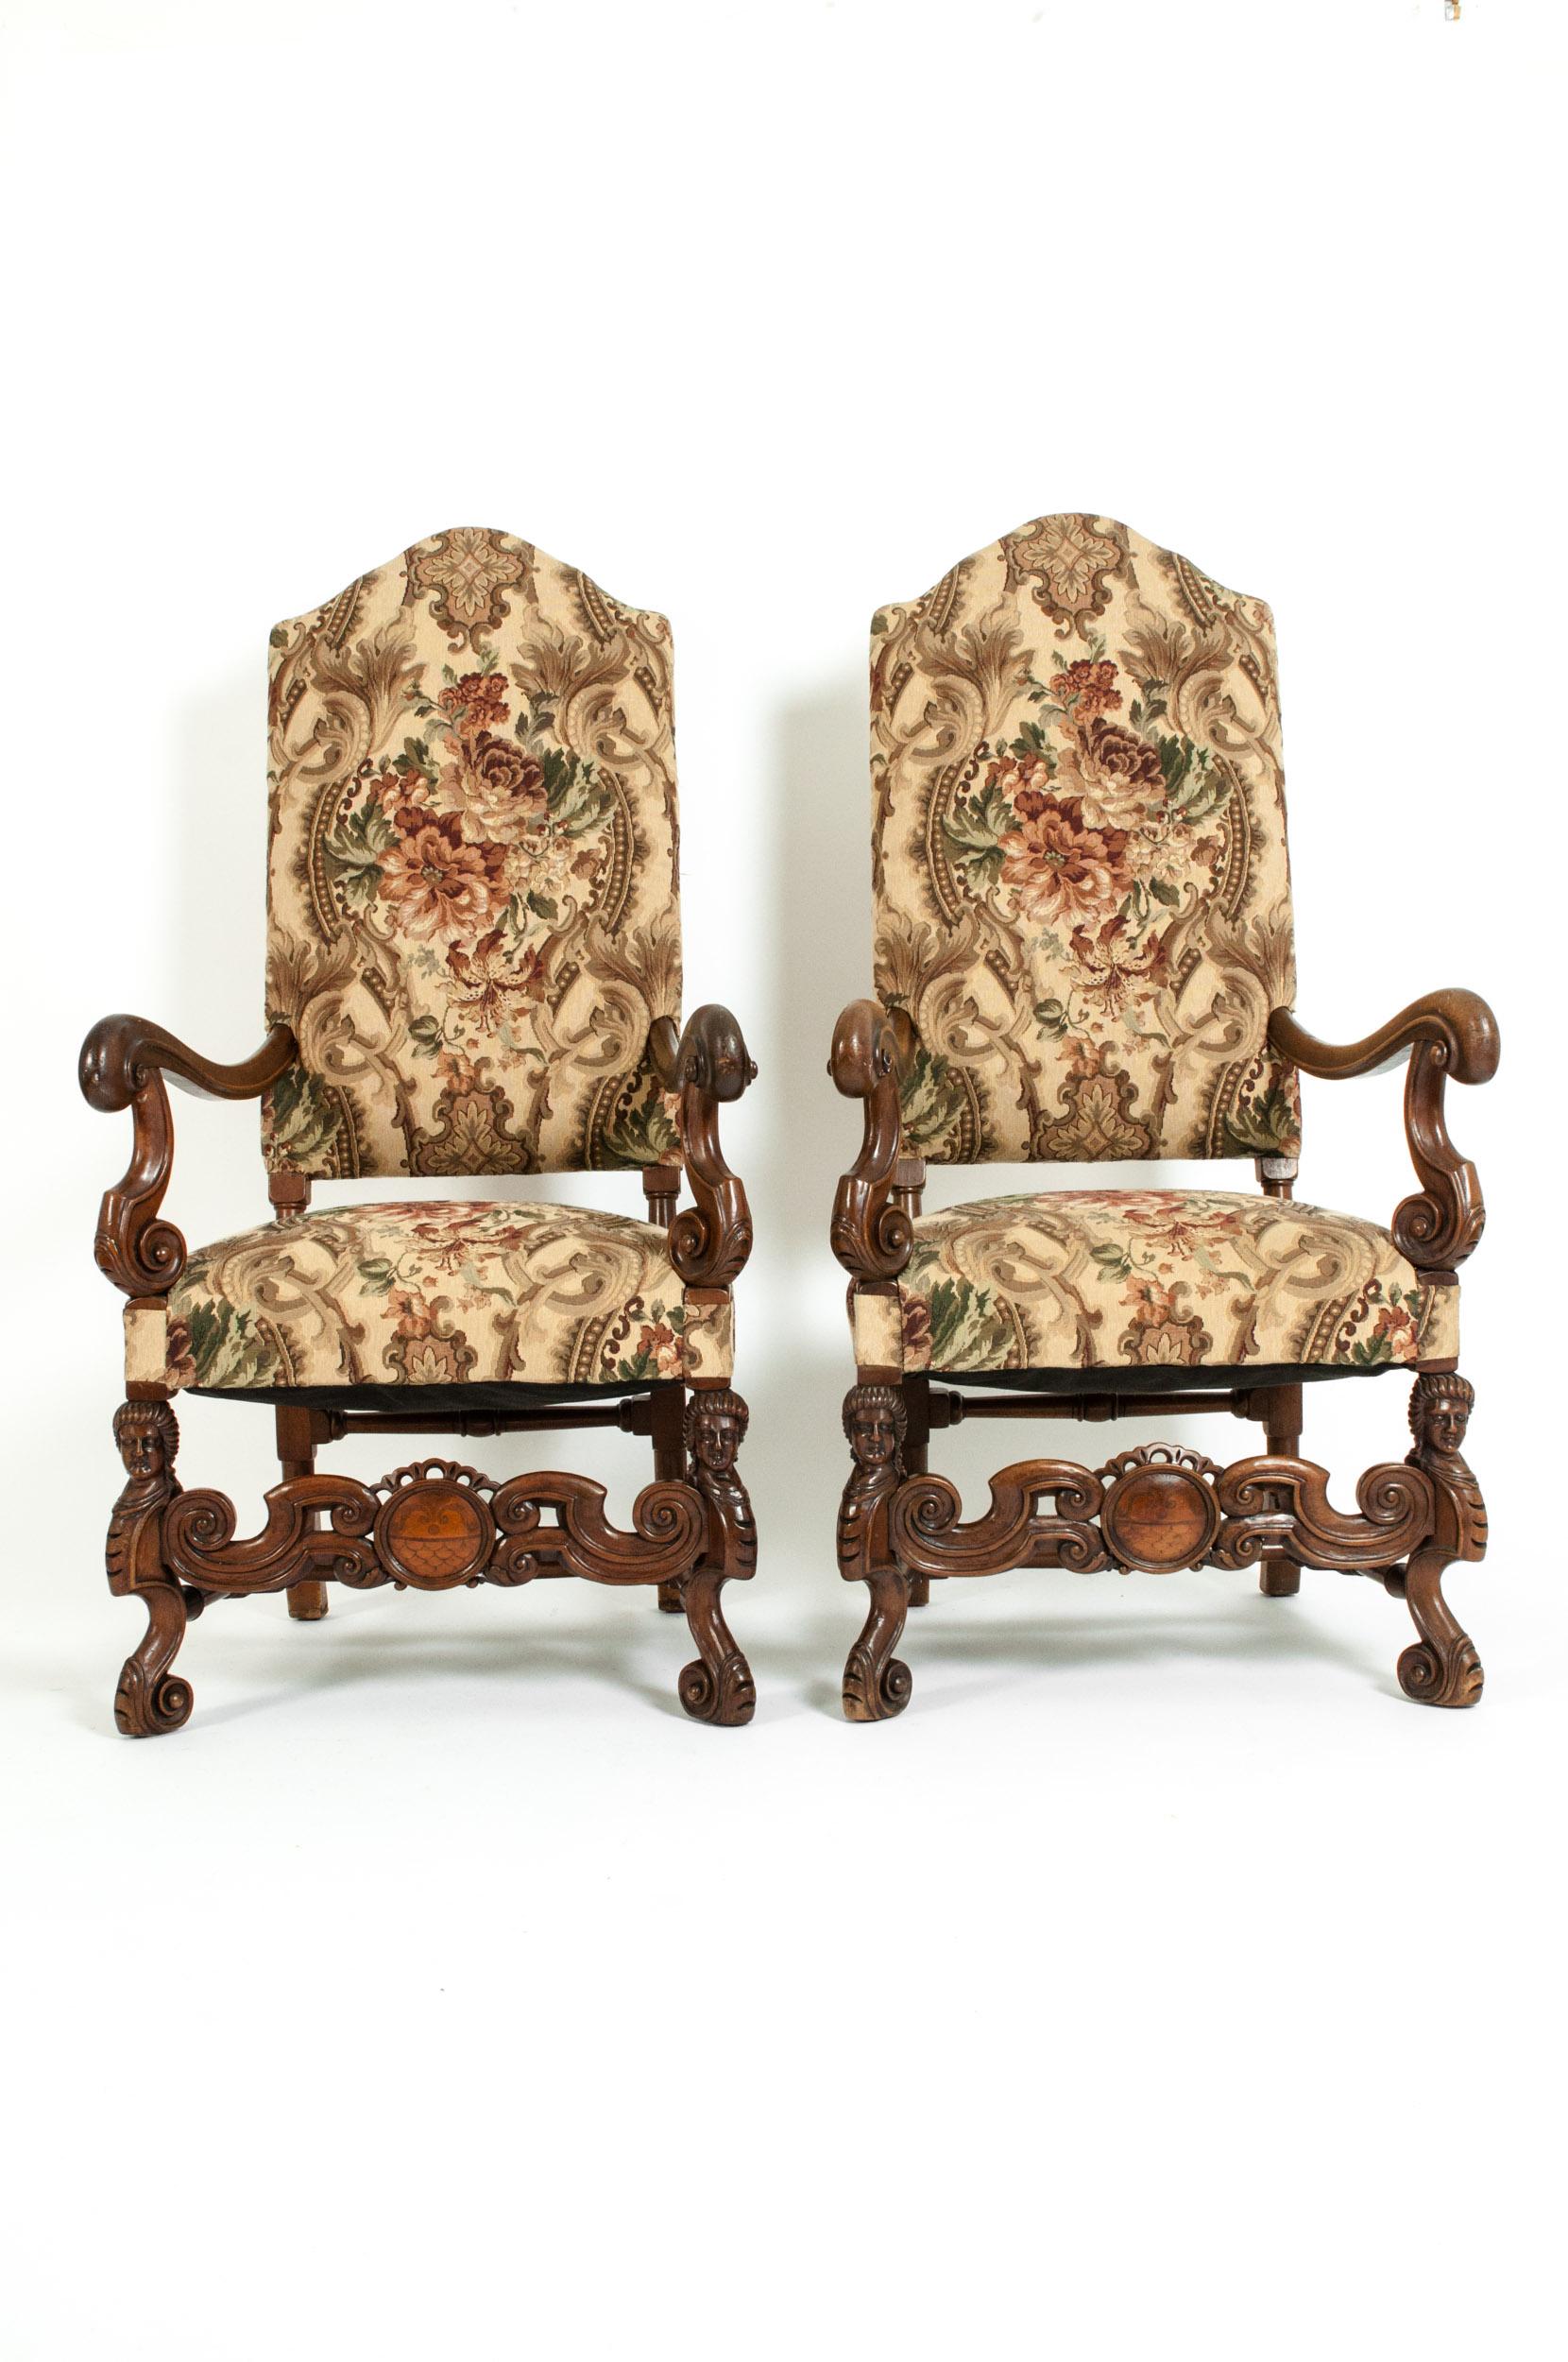 Pair Dutch hand carved walnut wood frame high back side / armchairs with figural Goddess heads / with tapestry upholstery. Each armchair is very sturdy & in excellent condition with appropriate wear consistent with age / use. Each armchair measure